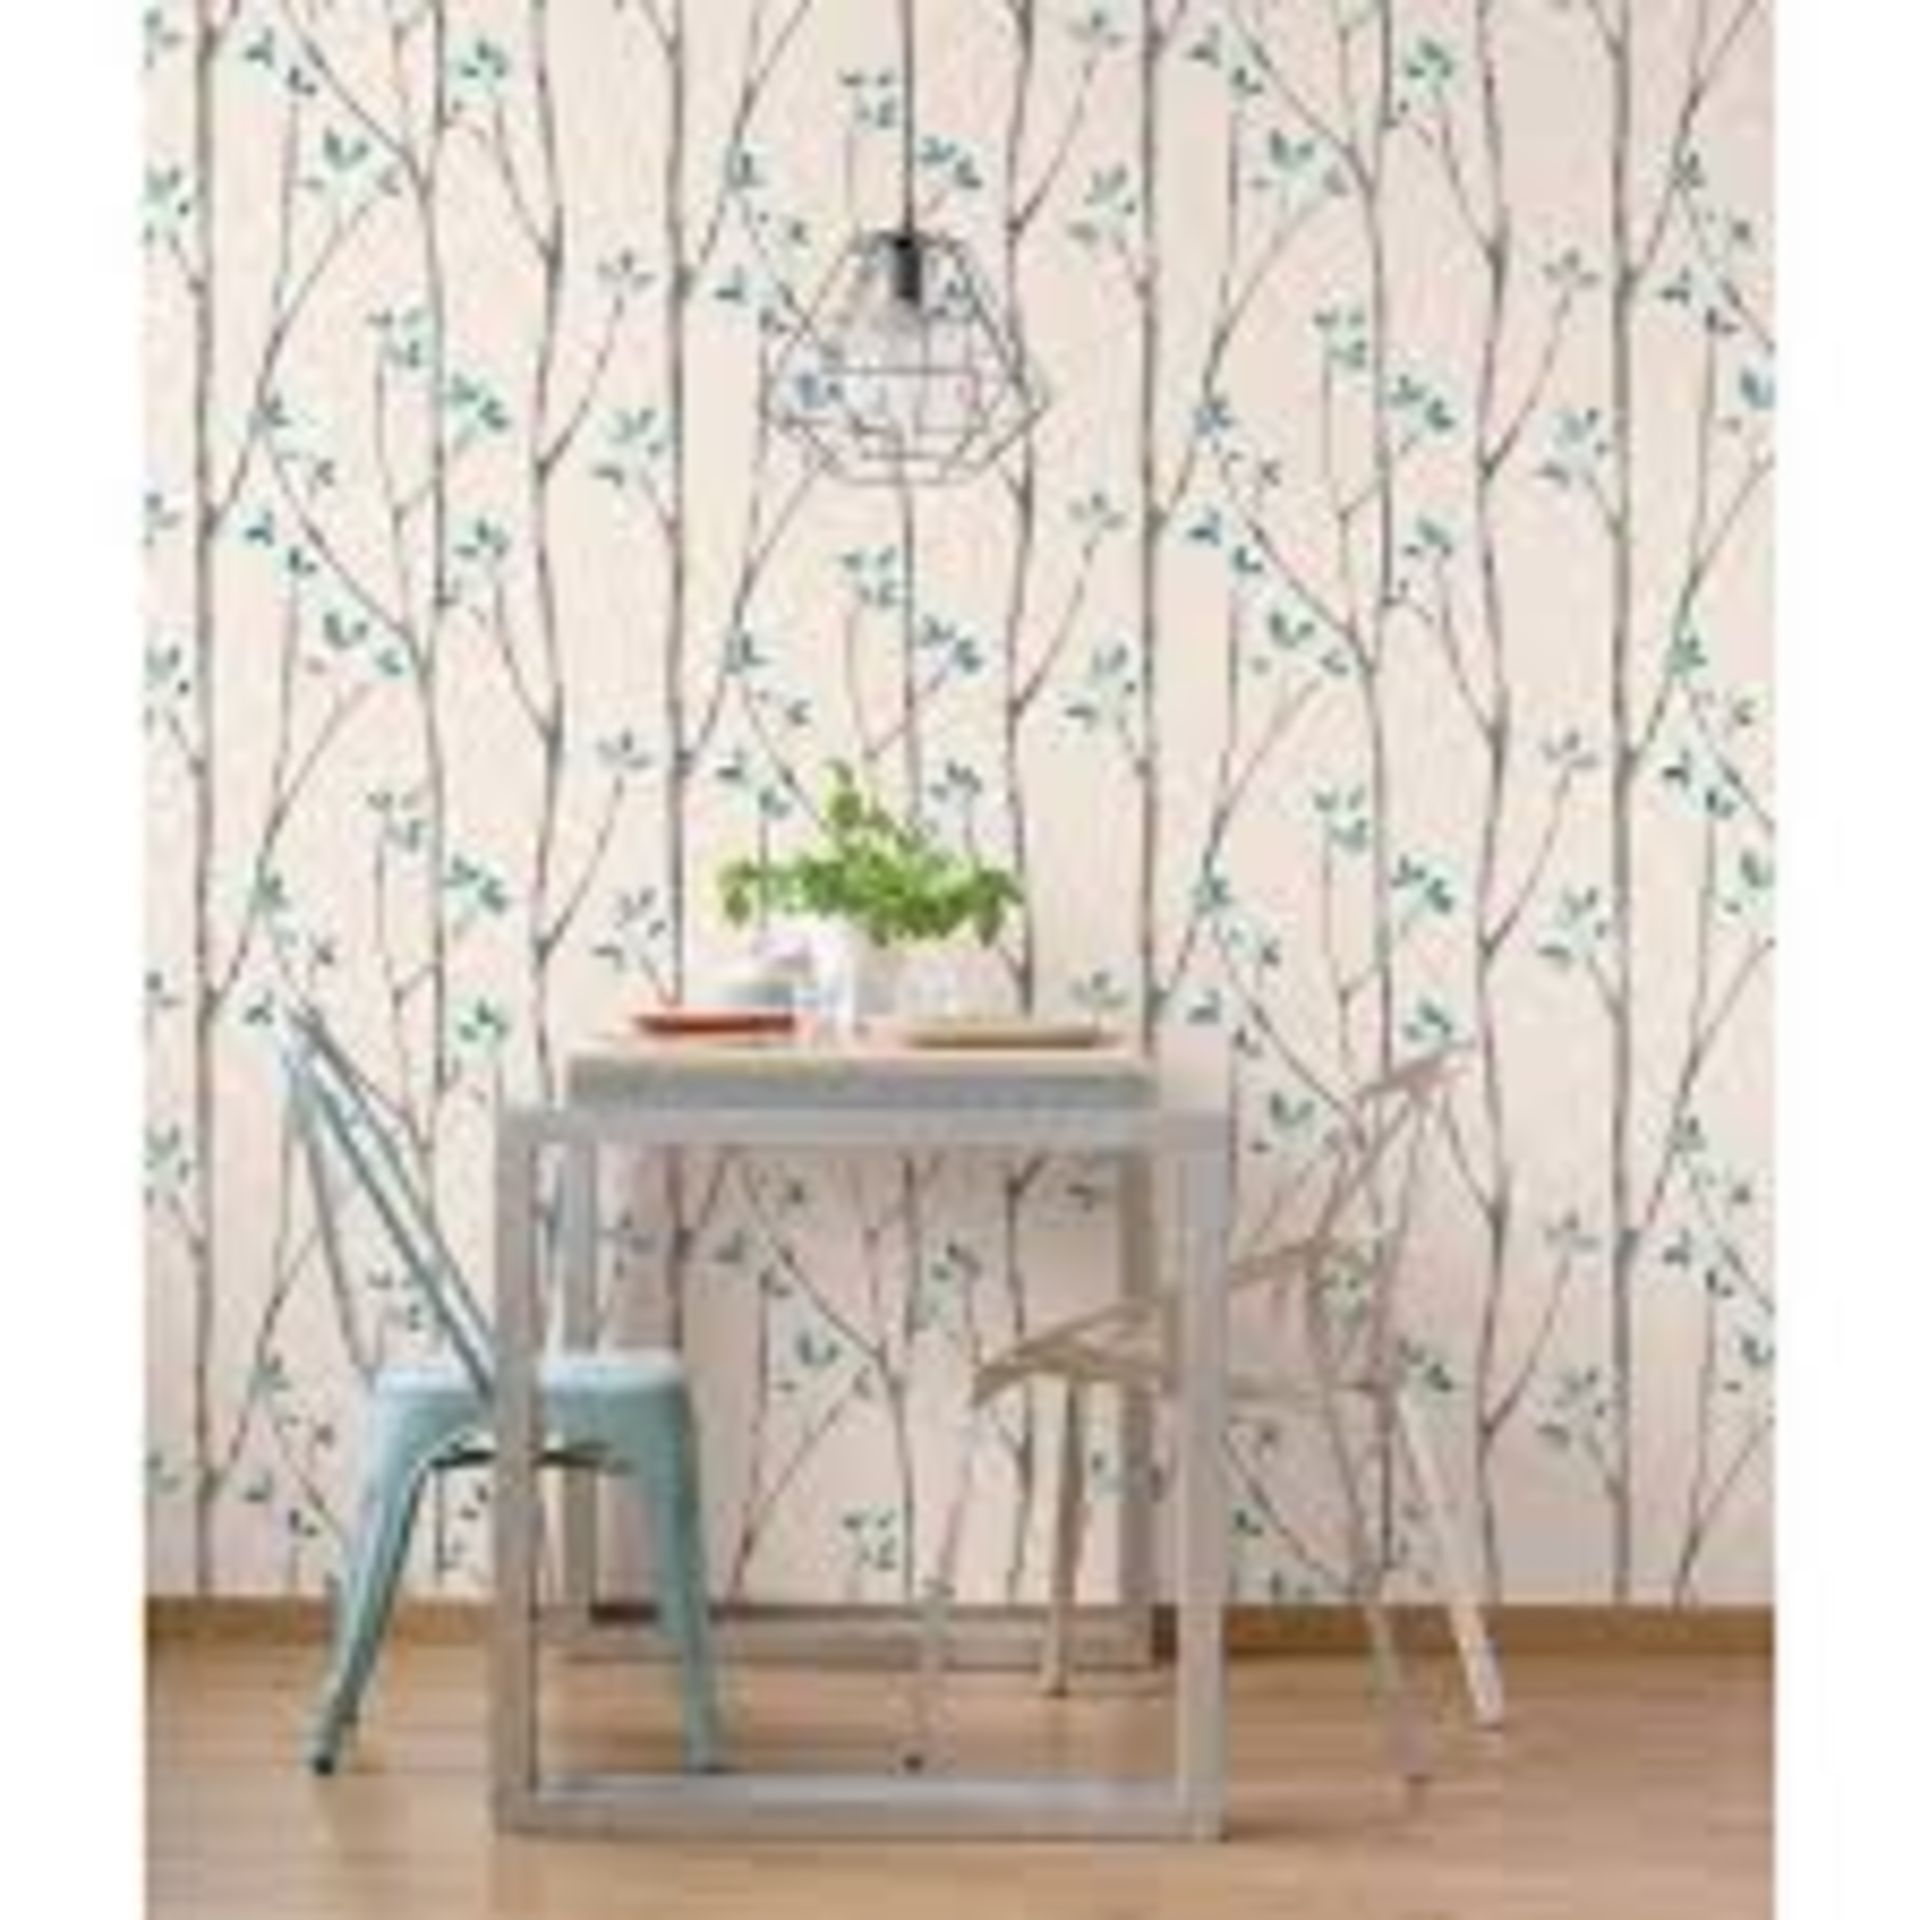 Lot To Contain 4 Brand New Urban Wall Design Repeat Wallpaper Combined RRP £160 (13482) (Pictures